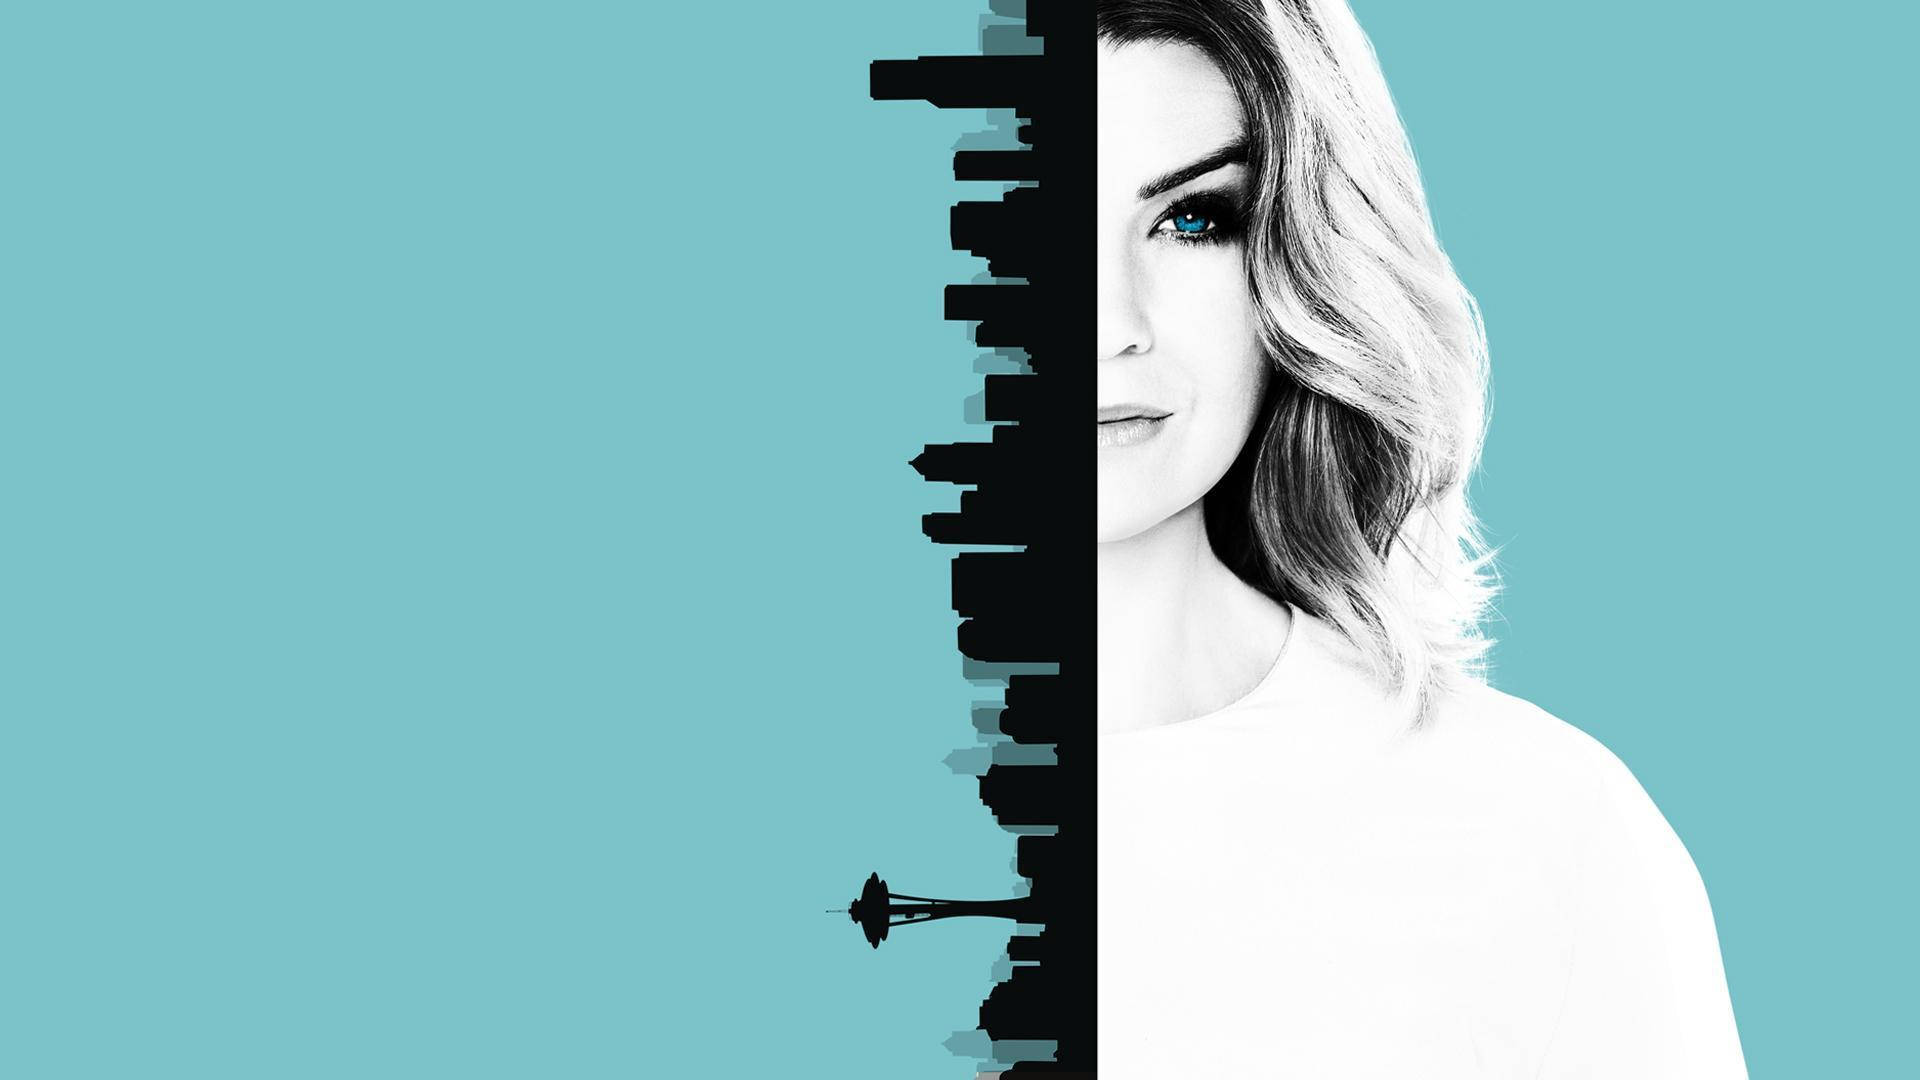 Grey's Anatomy Teal Poster Background